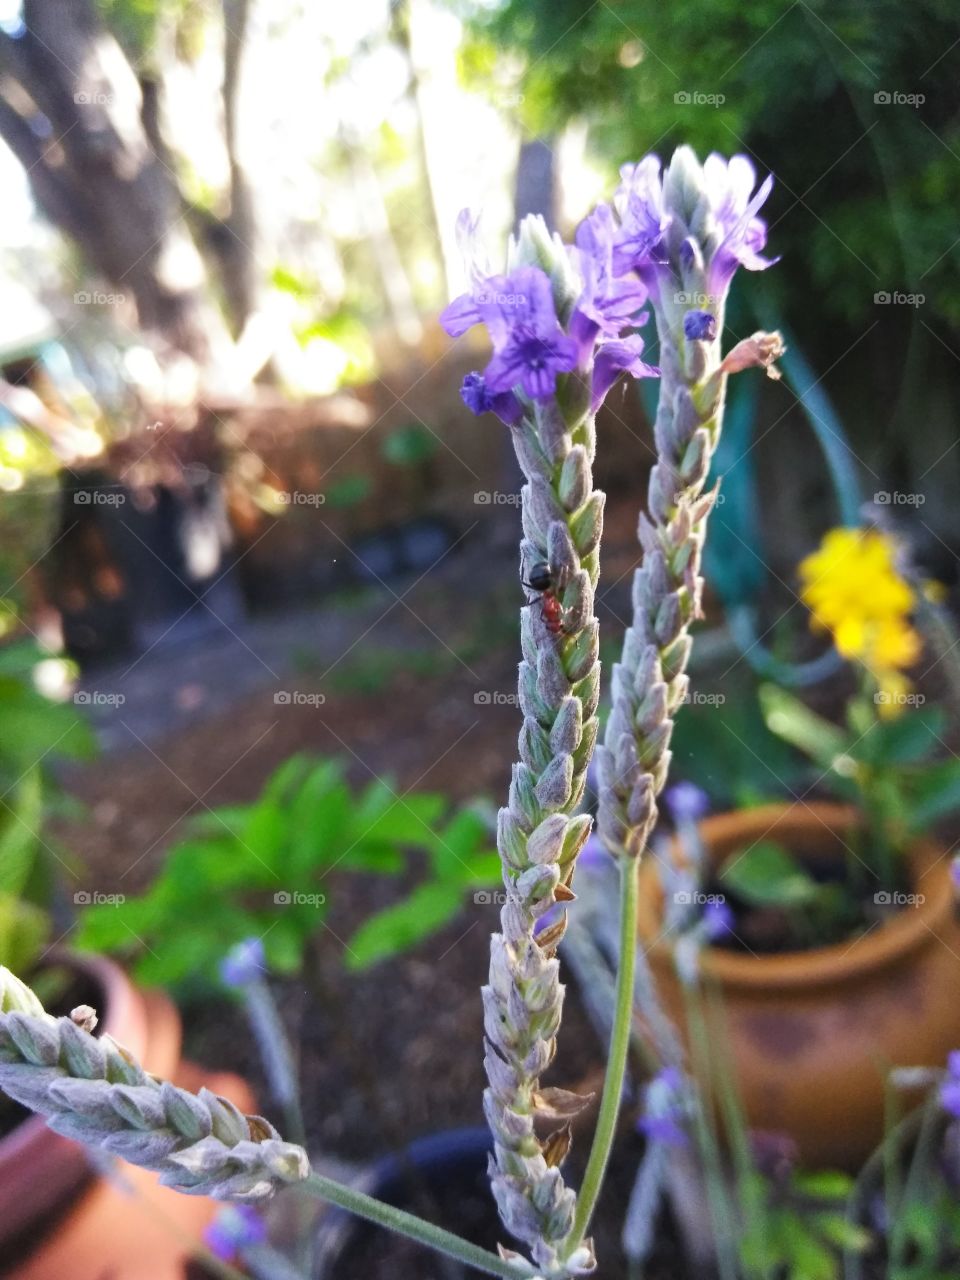 Ant on lavender flowers climbing up the stalk in the morning light